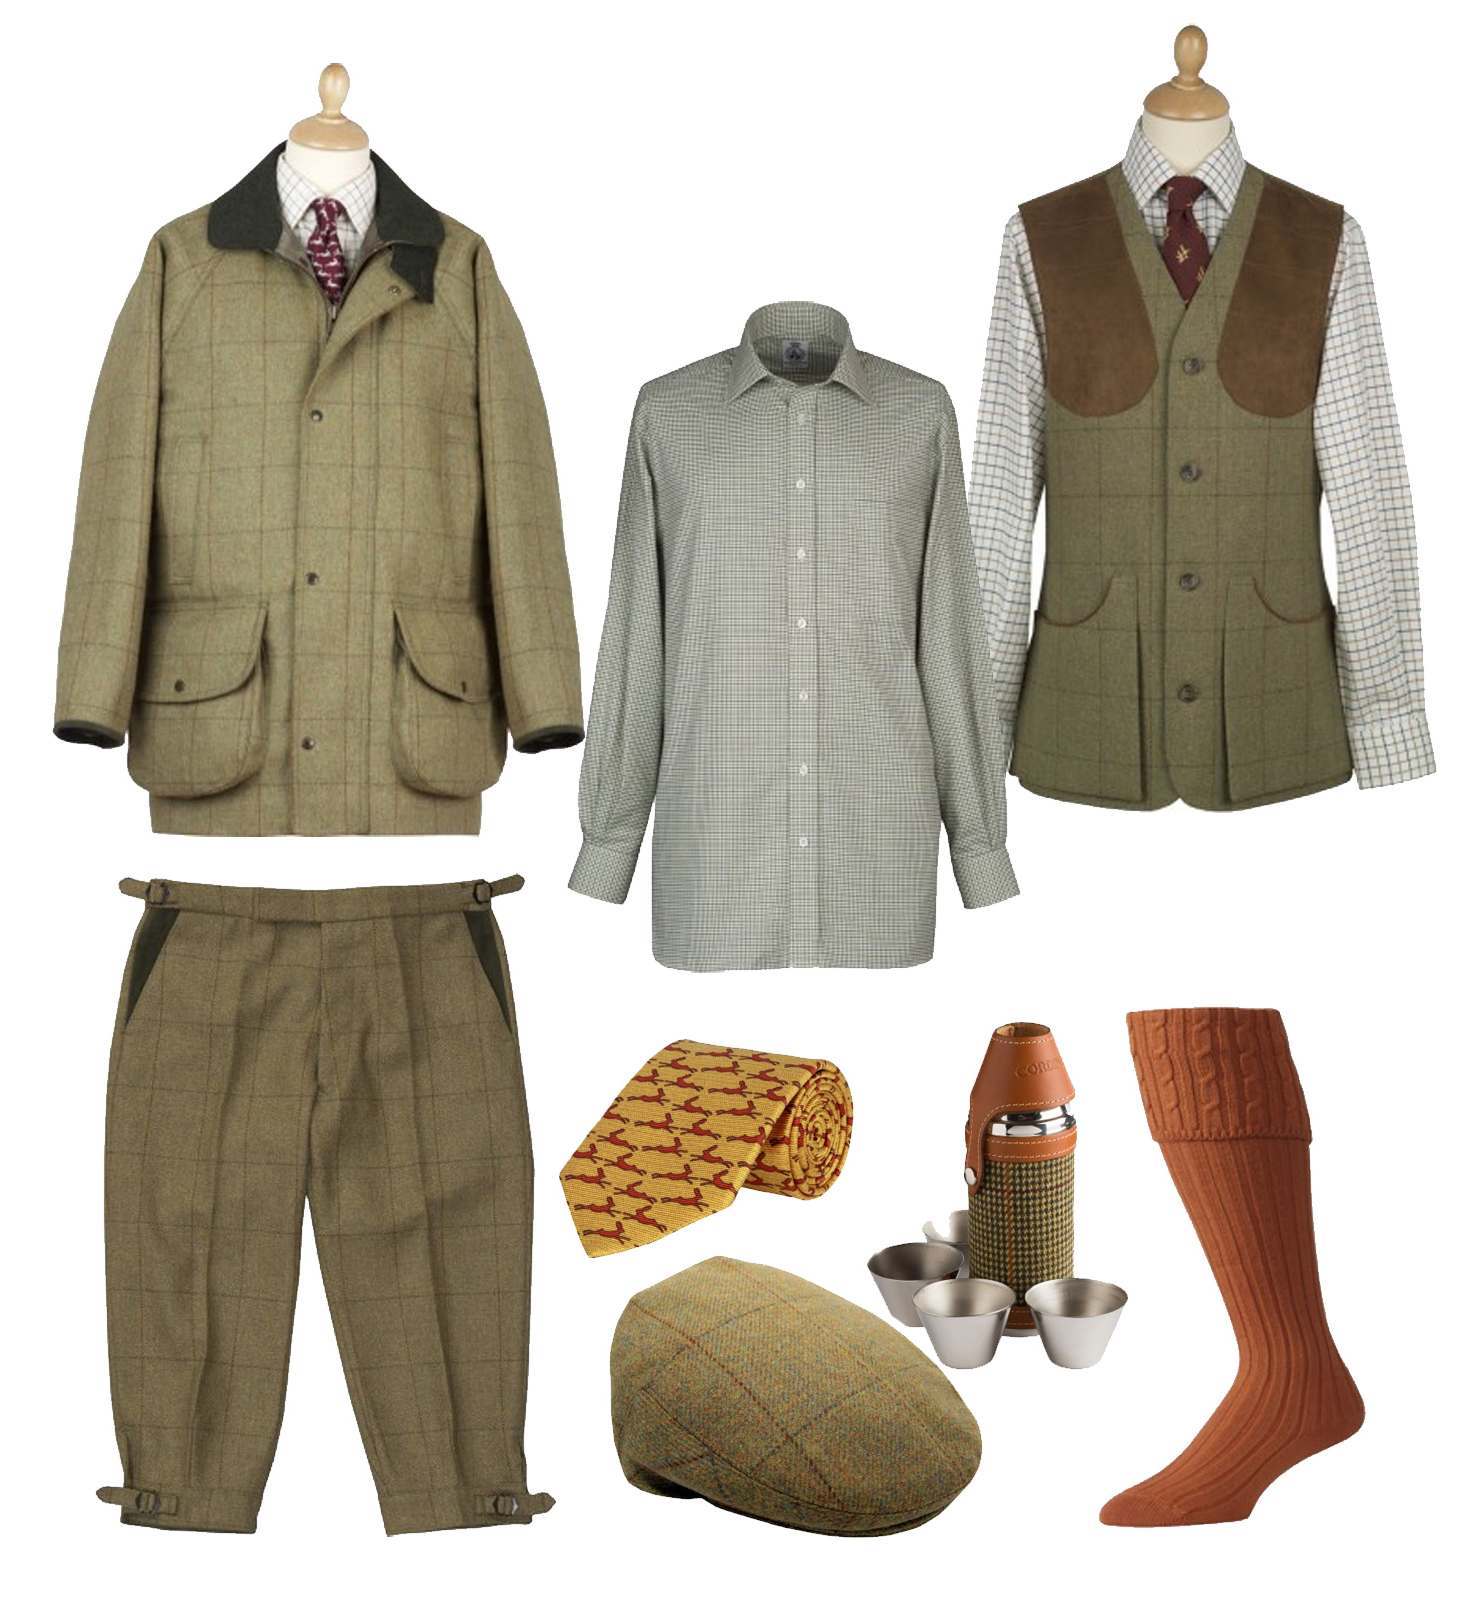 A collection of Cordings clothing items for a shooting trip including a tweet shooting jacket, a cotton tattersall shirt, a shooting waistcoat, tweed plus twos, a tweed cap, yellow silk tie, tween flask and dark orange shooting stockings